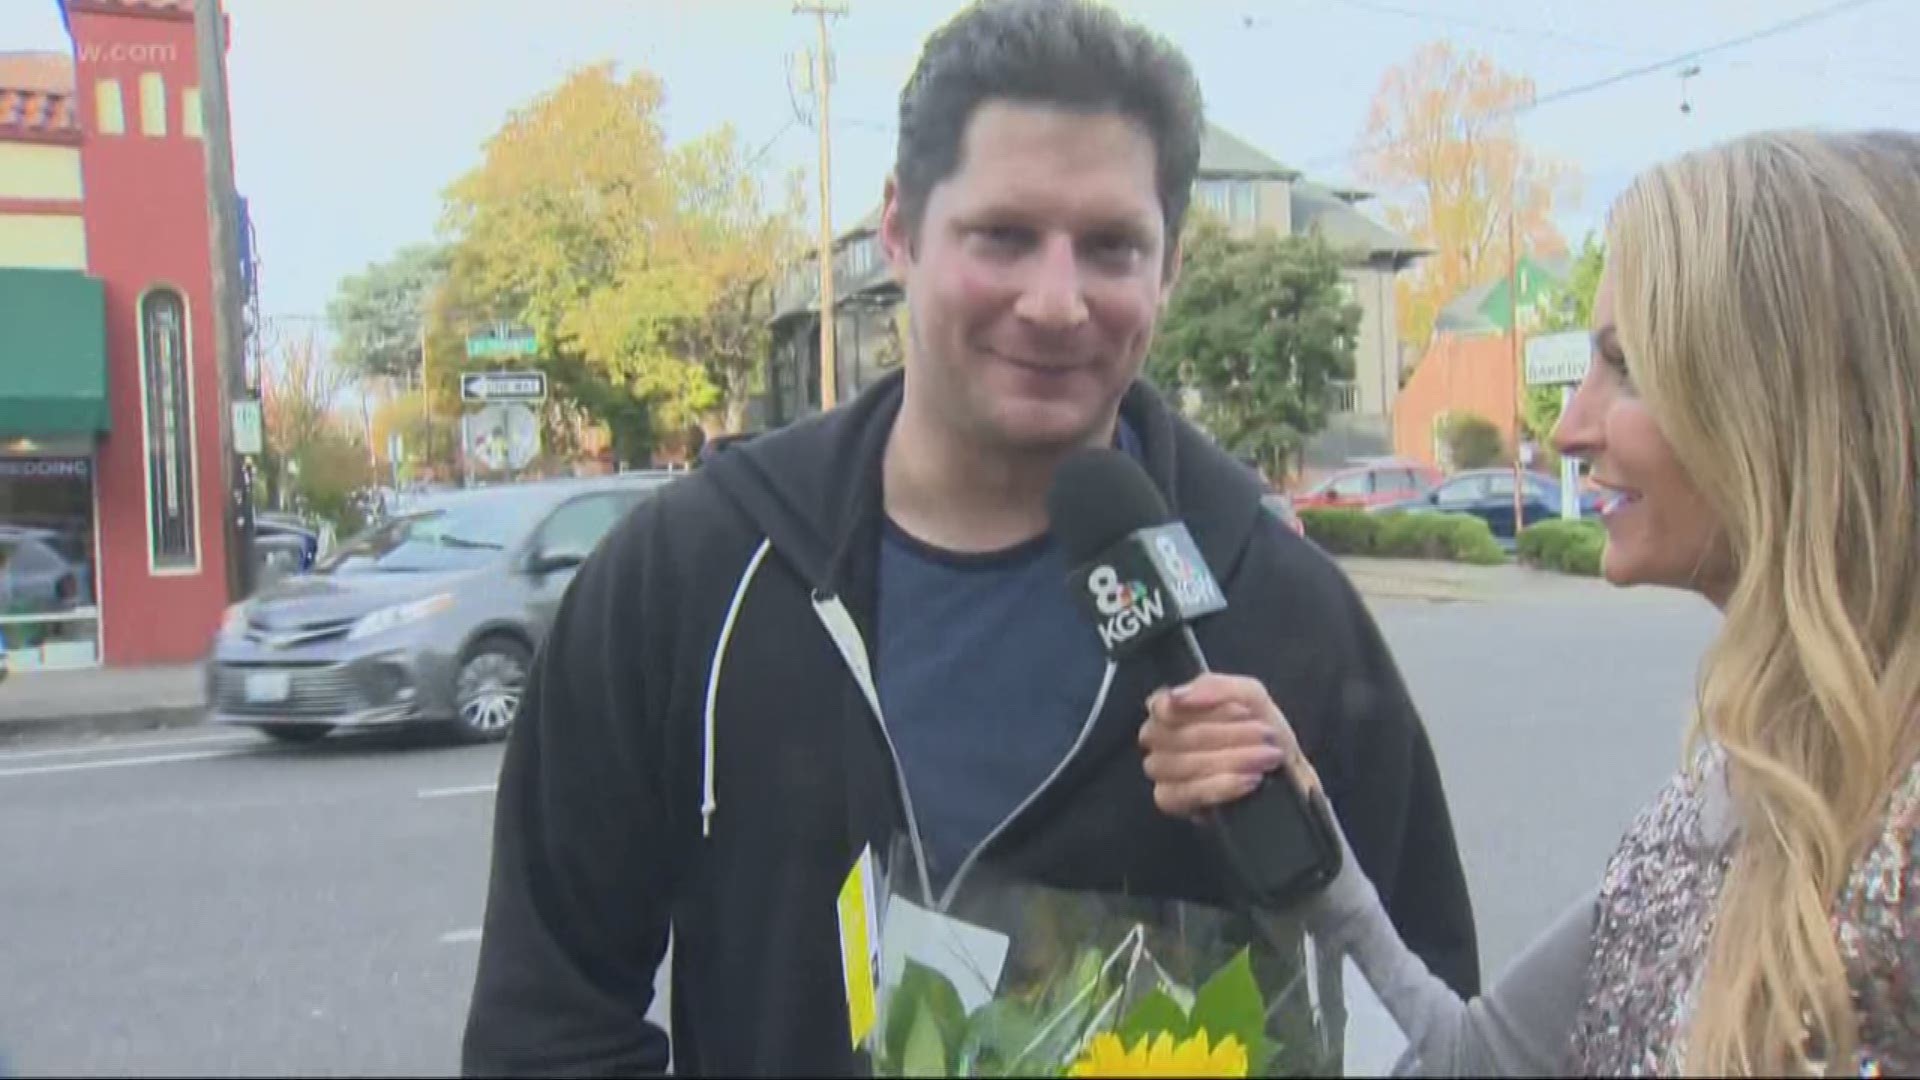 With a local florist for a special initiative. Free flowers across the country participating. KGW